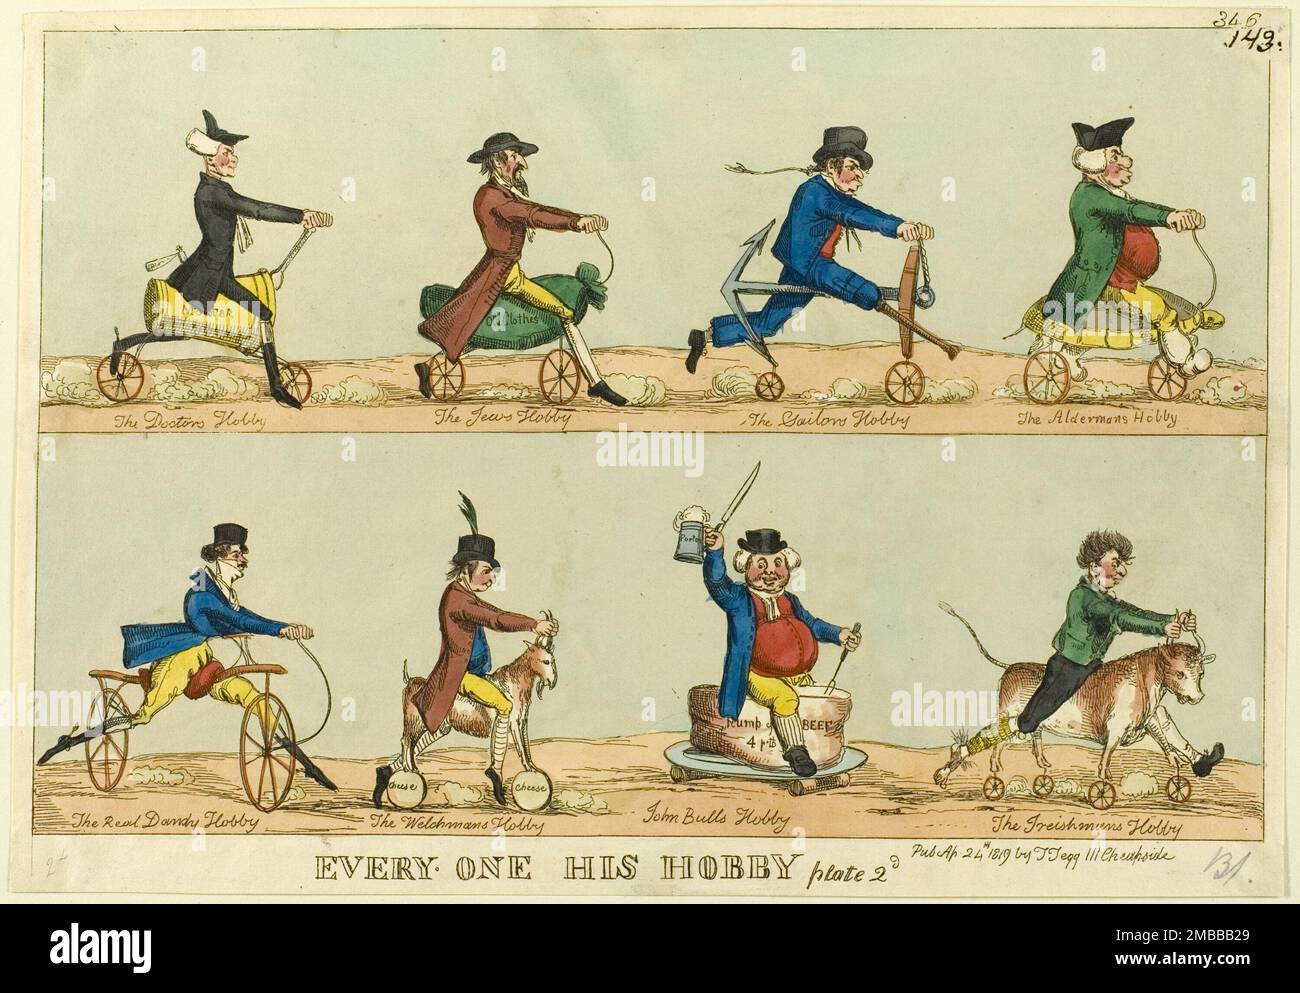 Everyone His Hobby, plate 2, published April 24, 1819. Caricatures of men riding hobby horses (a forerunner of the bicycle) designed to reflect their profession: 'The Doctor's Hobby [a mortar and pestle], The Jew's Hobby [a bag of old clothes], The Sailor's Hobby [an anchor], The Alderman's Hobby [a turtle, reference to turtle soup?], The Real Dandy Hobby [a dandy horse, ridden by a macaroni in high collar], The Welchman's Hobby [a goat, with cheeses for wheels], John Bull's Hobby [a rump of beef], The Irishman's Hobby' [a bull]. Attributed to William Heath. Stock Photo